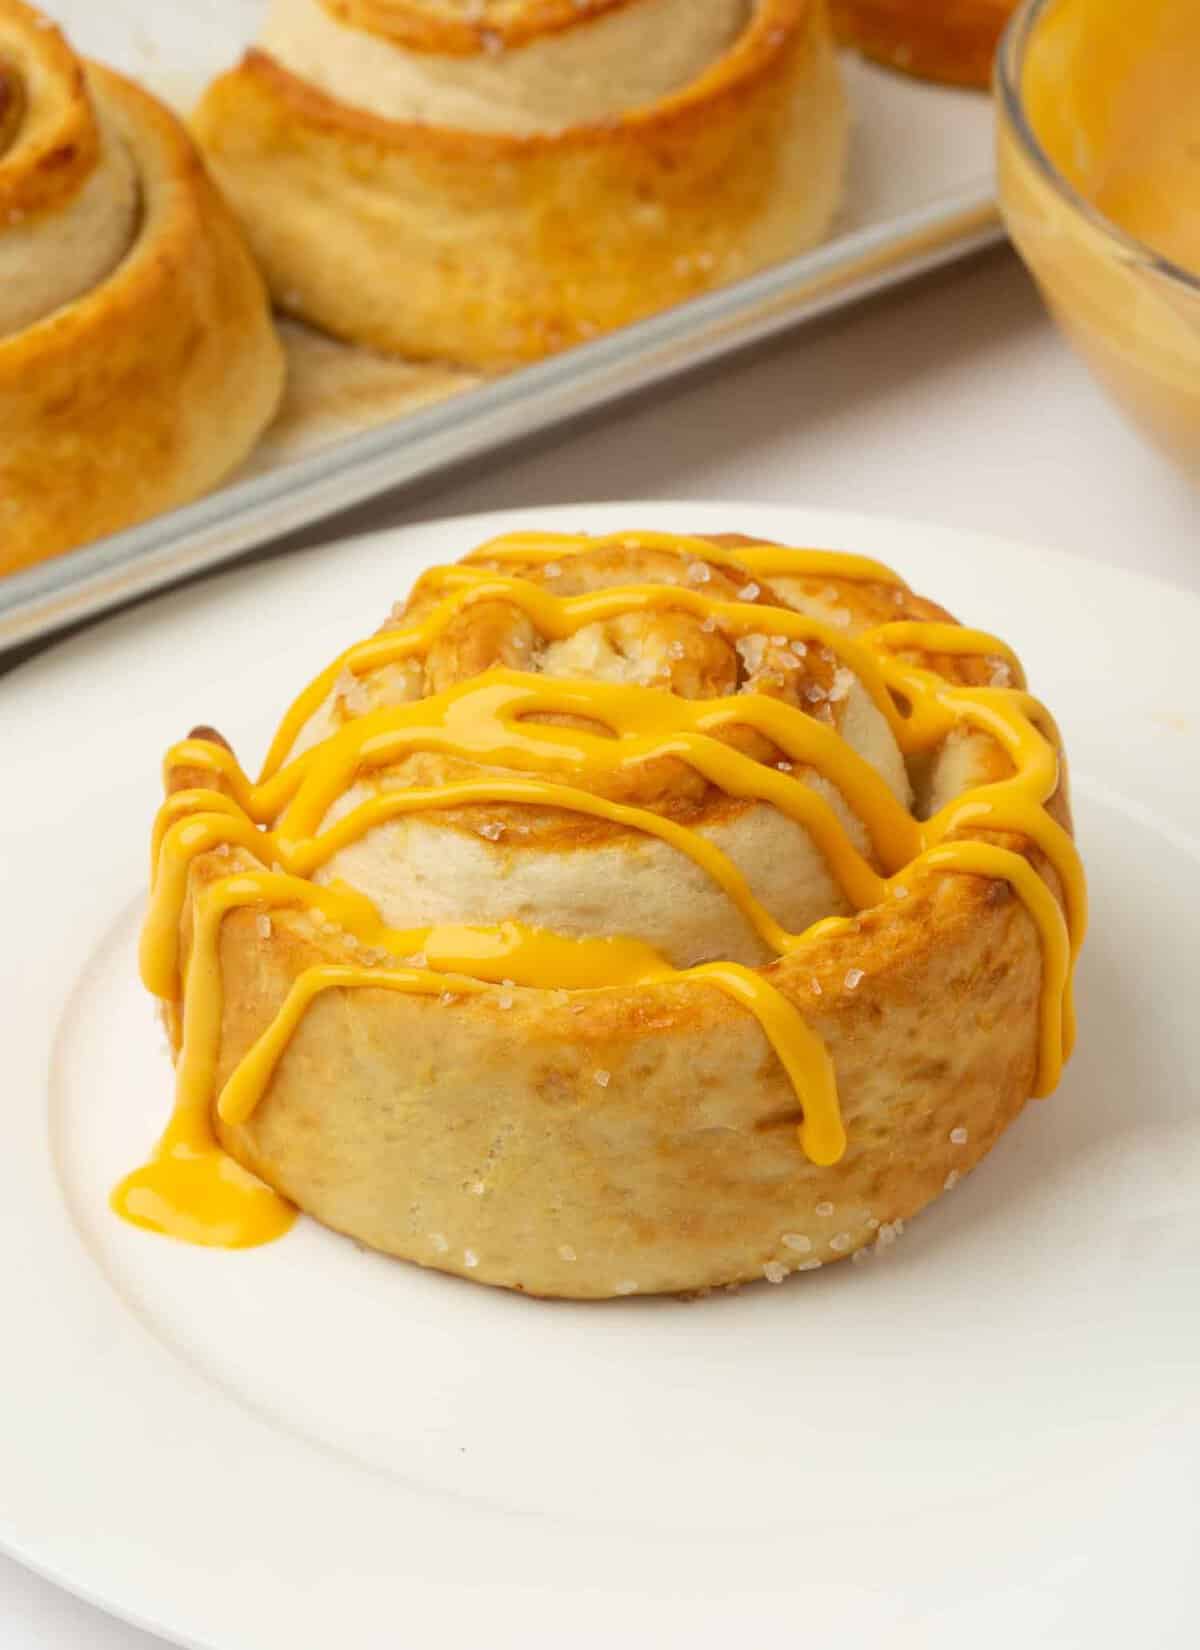 pretzel rolls with drizzled cheese sauce